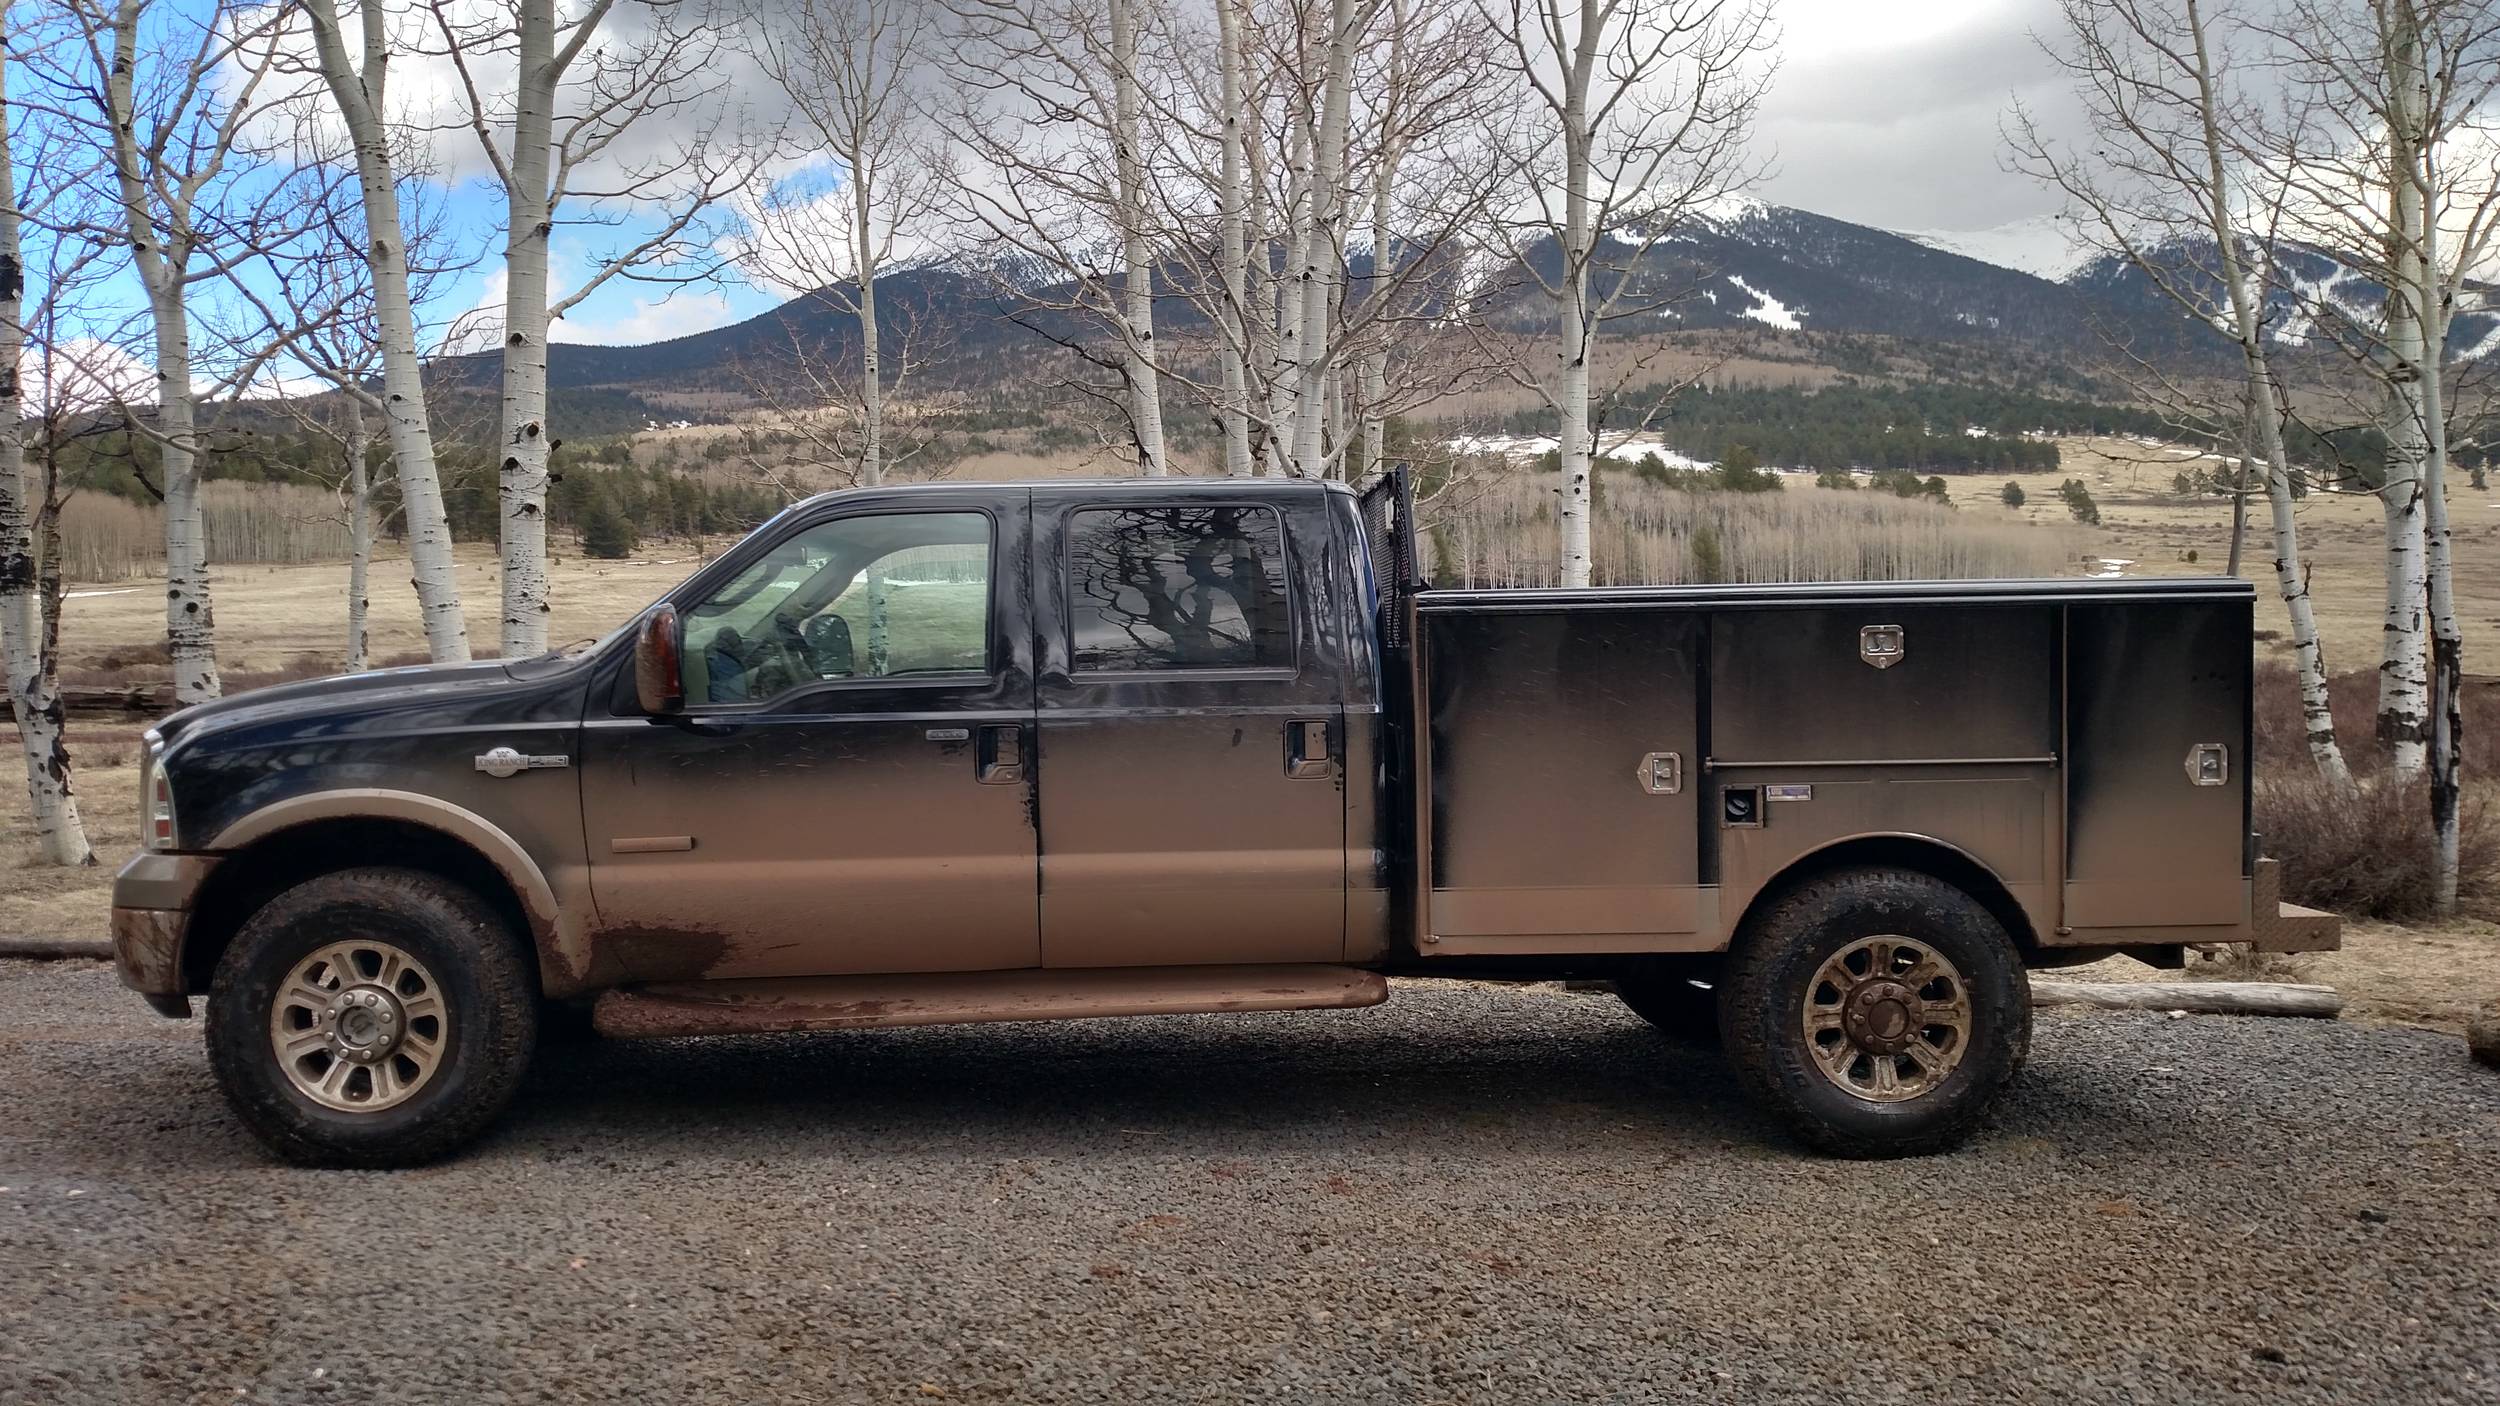 2006 F350 KR Utility bed